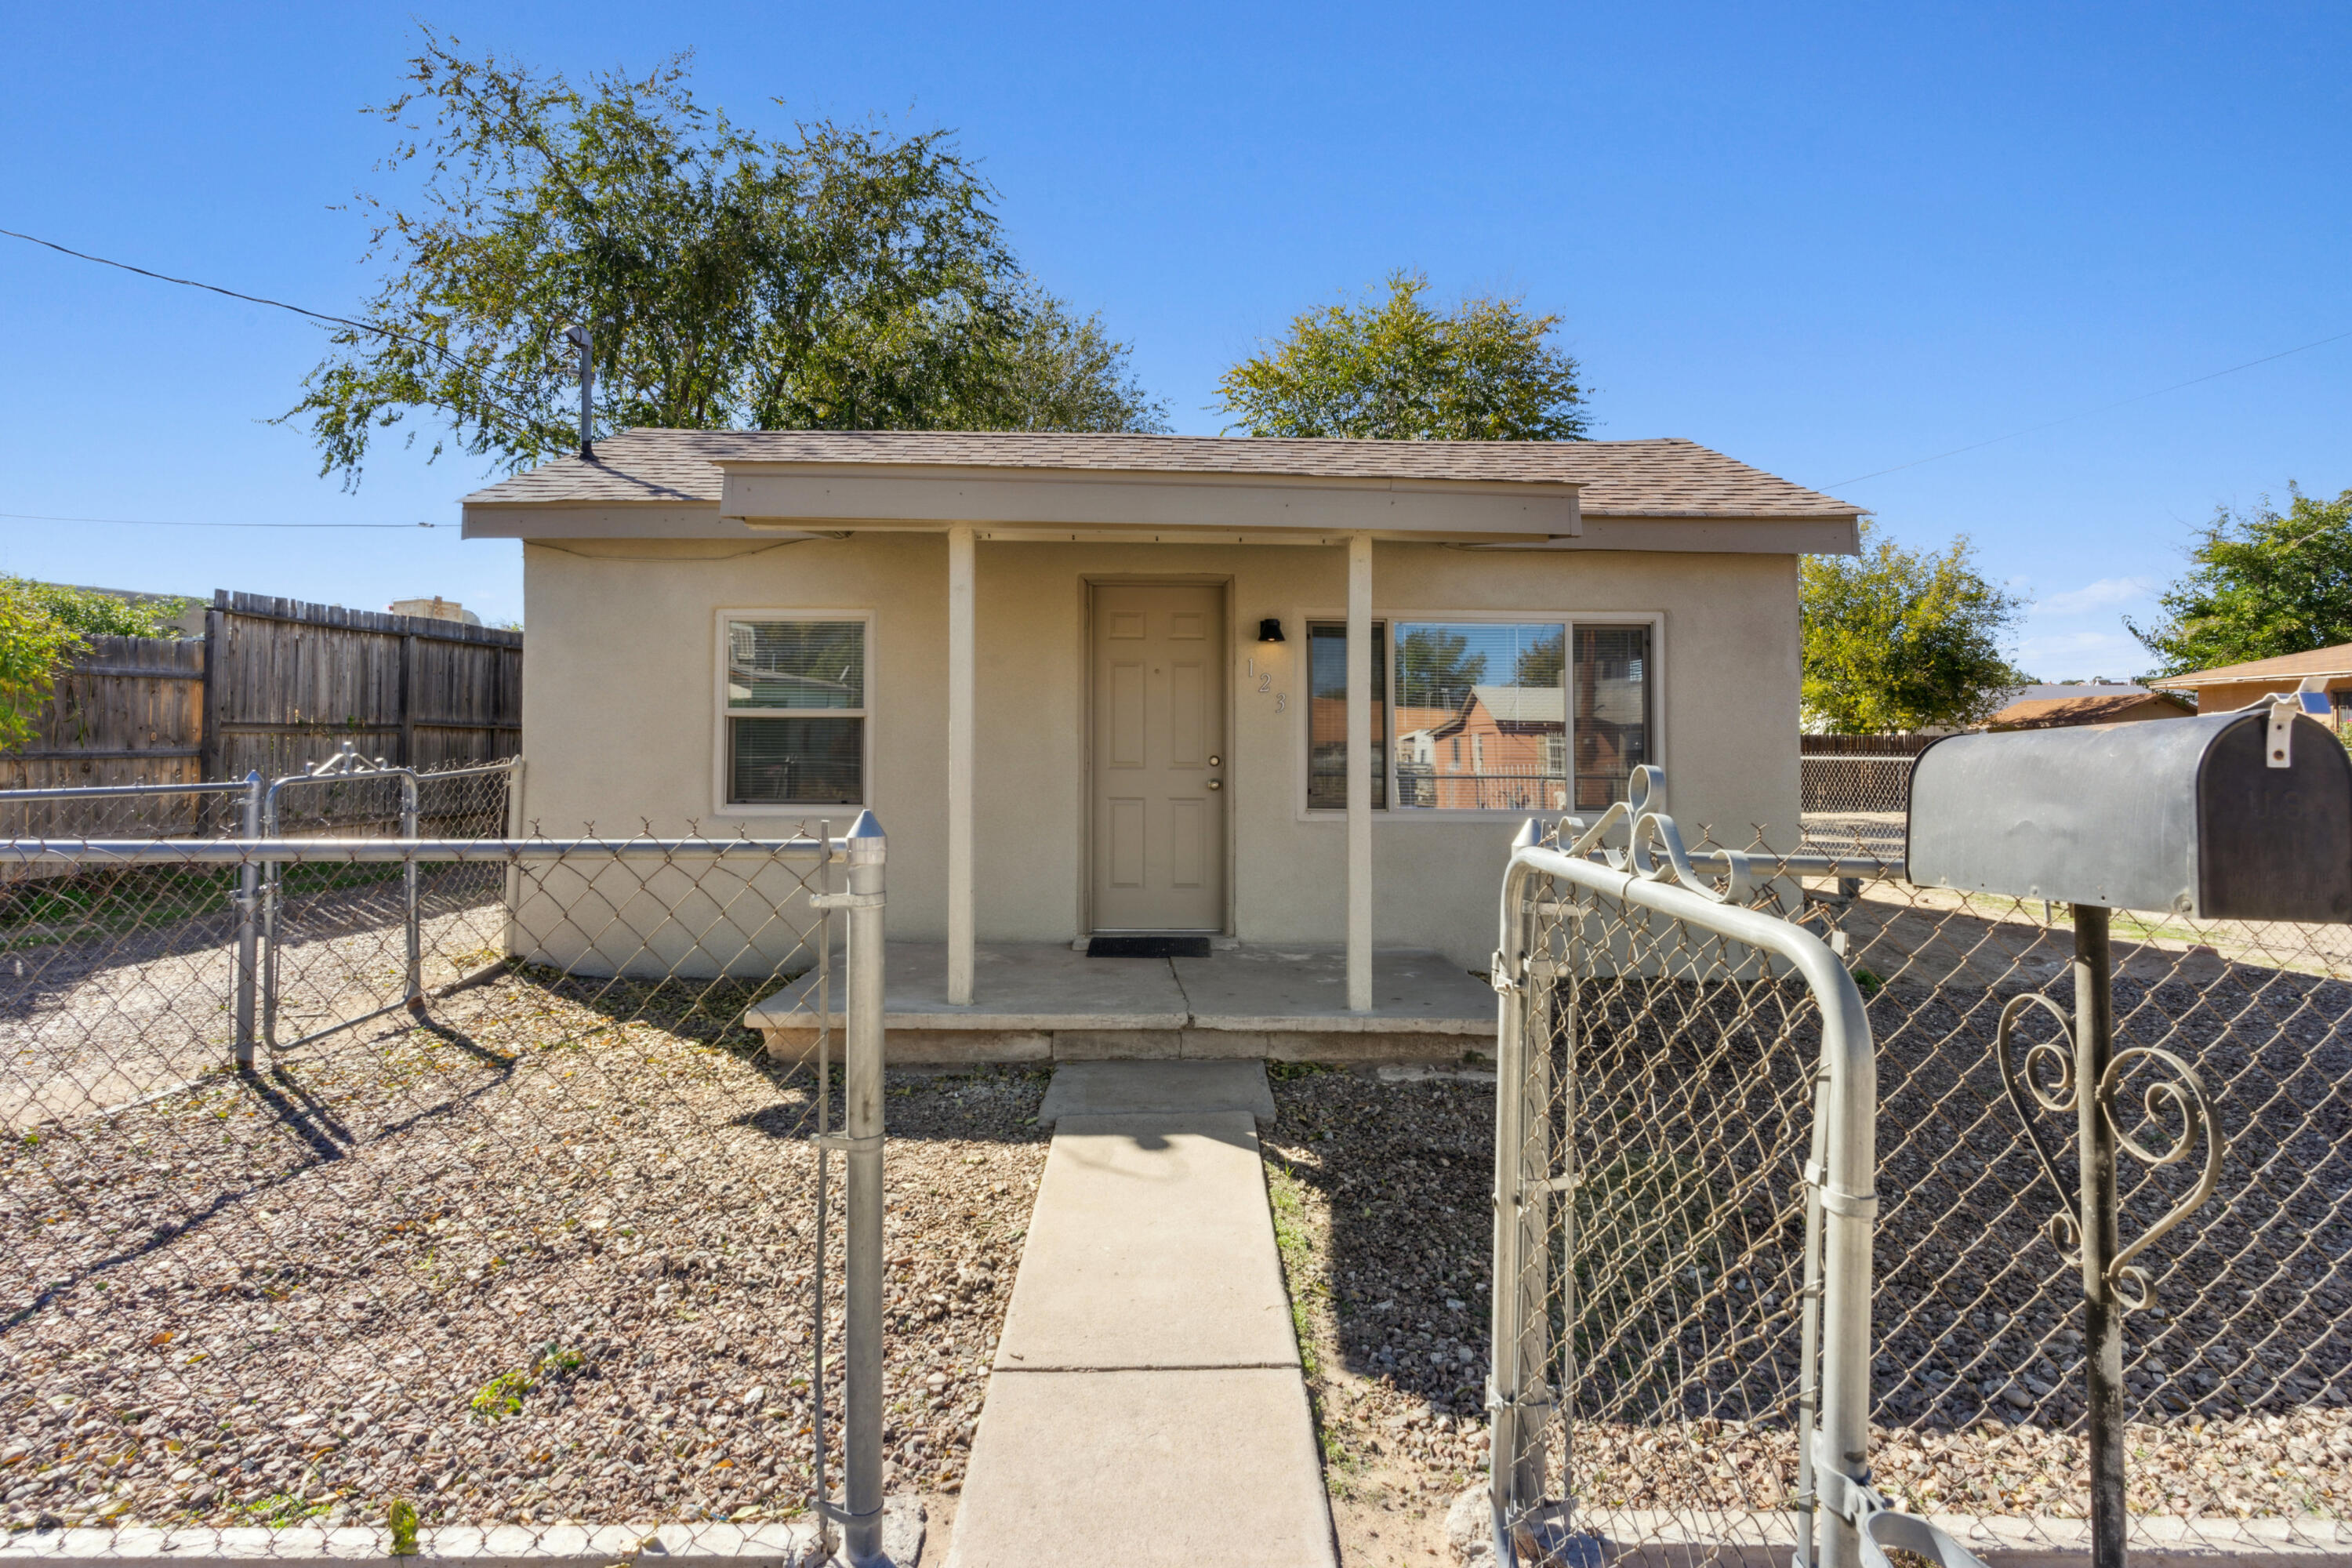 Absolutely Charming Home!  Many updates throughout entire home! An awesome large back yard with side yard access. Conveniently located. Schedule your appointment today! You don't want to miss out on this opportunity!